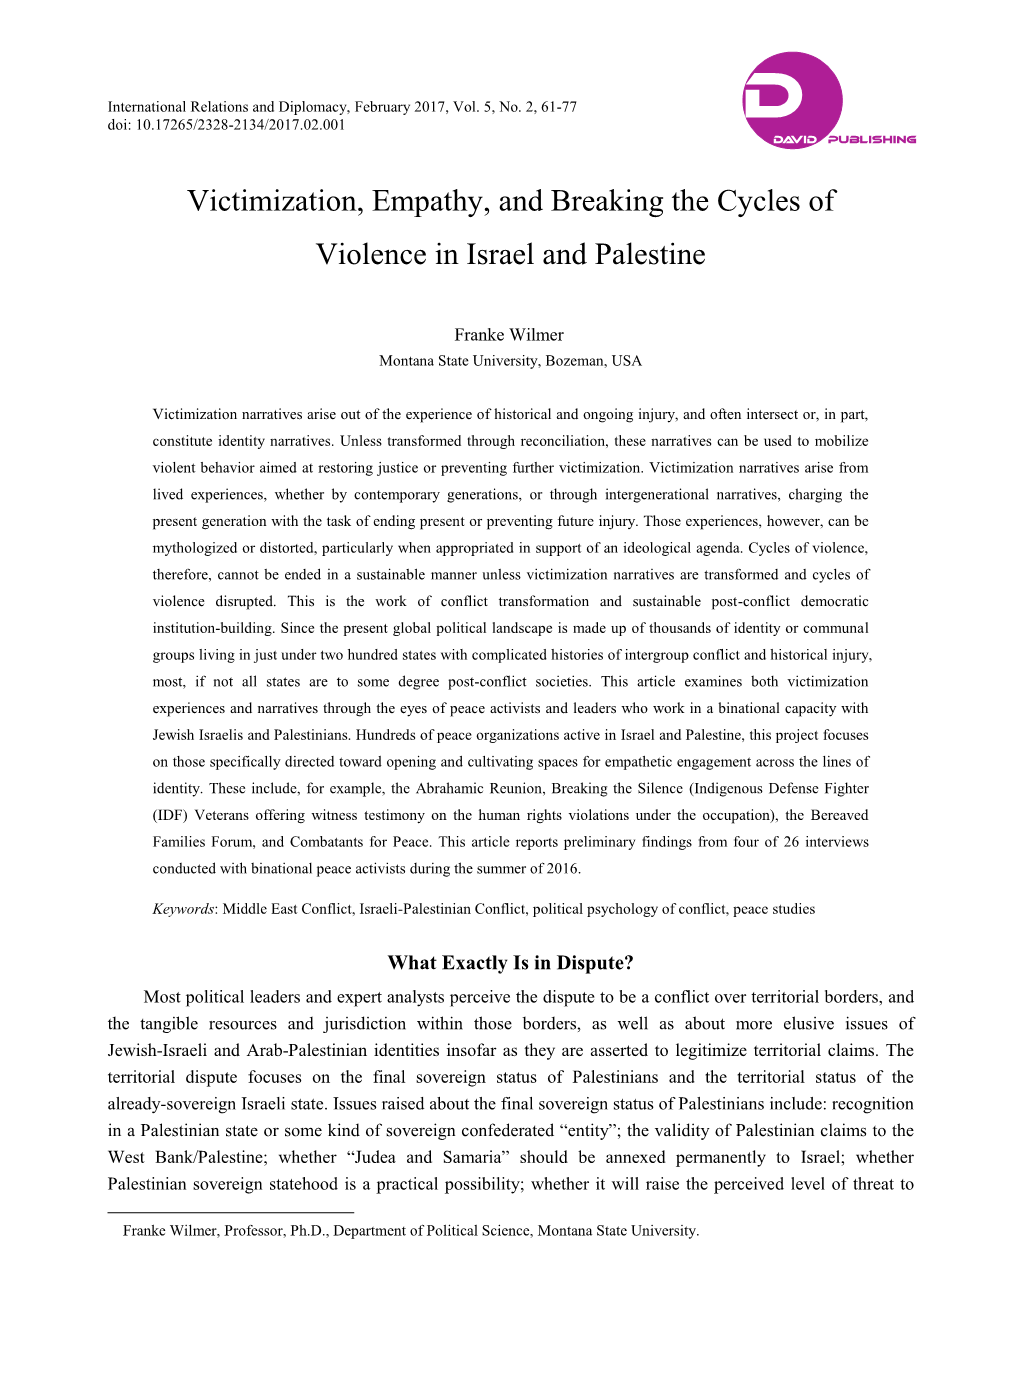 Victimization, Empathy, and Breaking the Cycles of Violence in Israel and Palestine